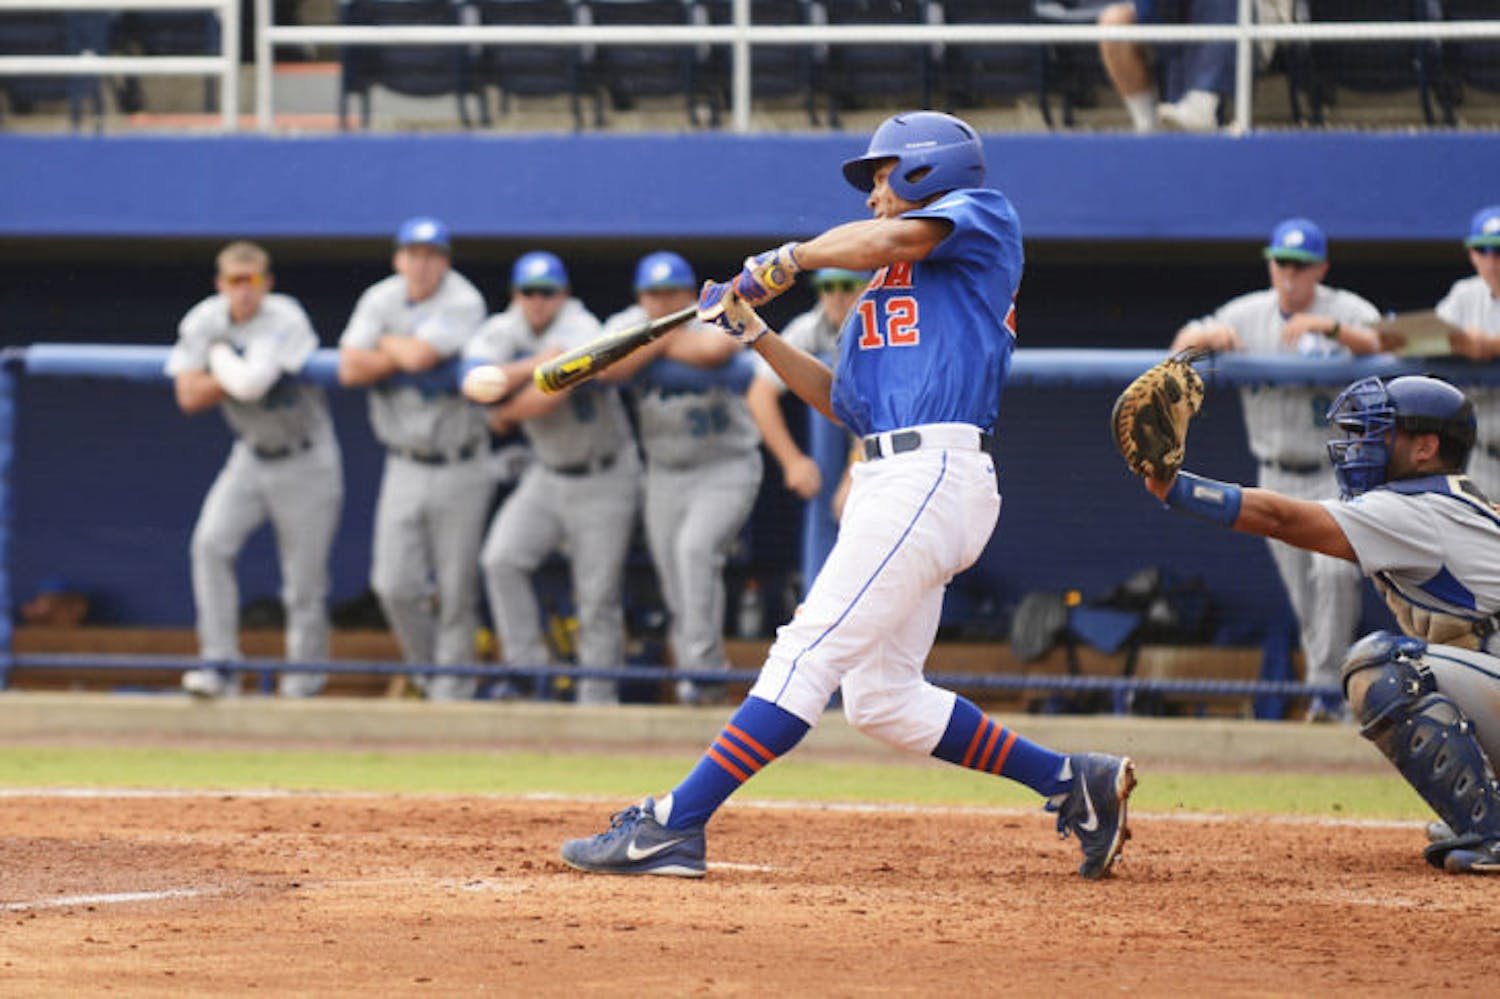 Freshman Richie Martin (12) bats in Florida’s 7-4 loss to Florida Gulf Coast on Feb. 24 at McKethan Stadium. Martin was the only player with more than one hit in the Gators' 4-2 loss to the Volunteers on Sunday.